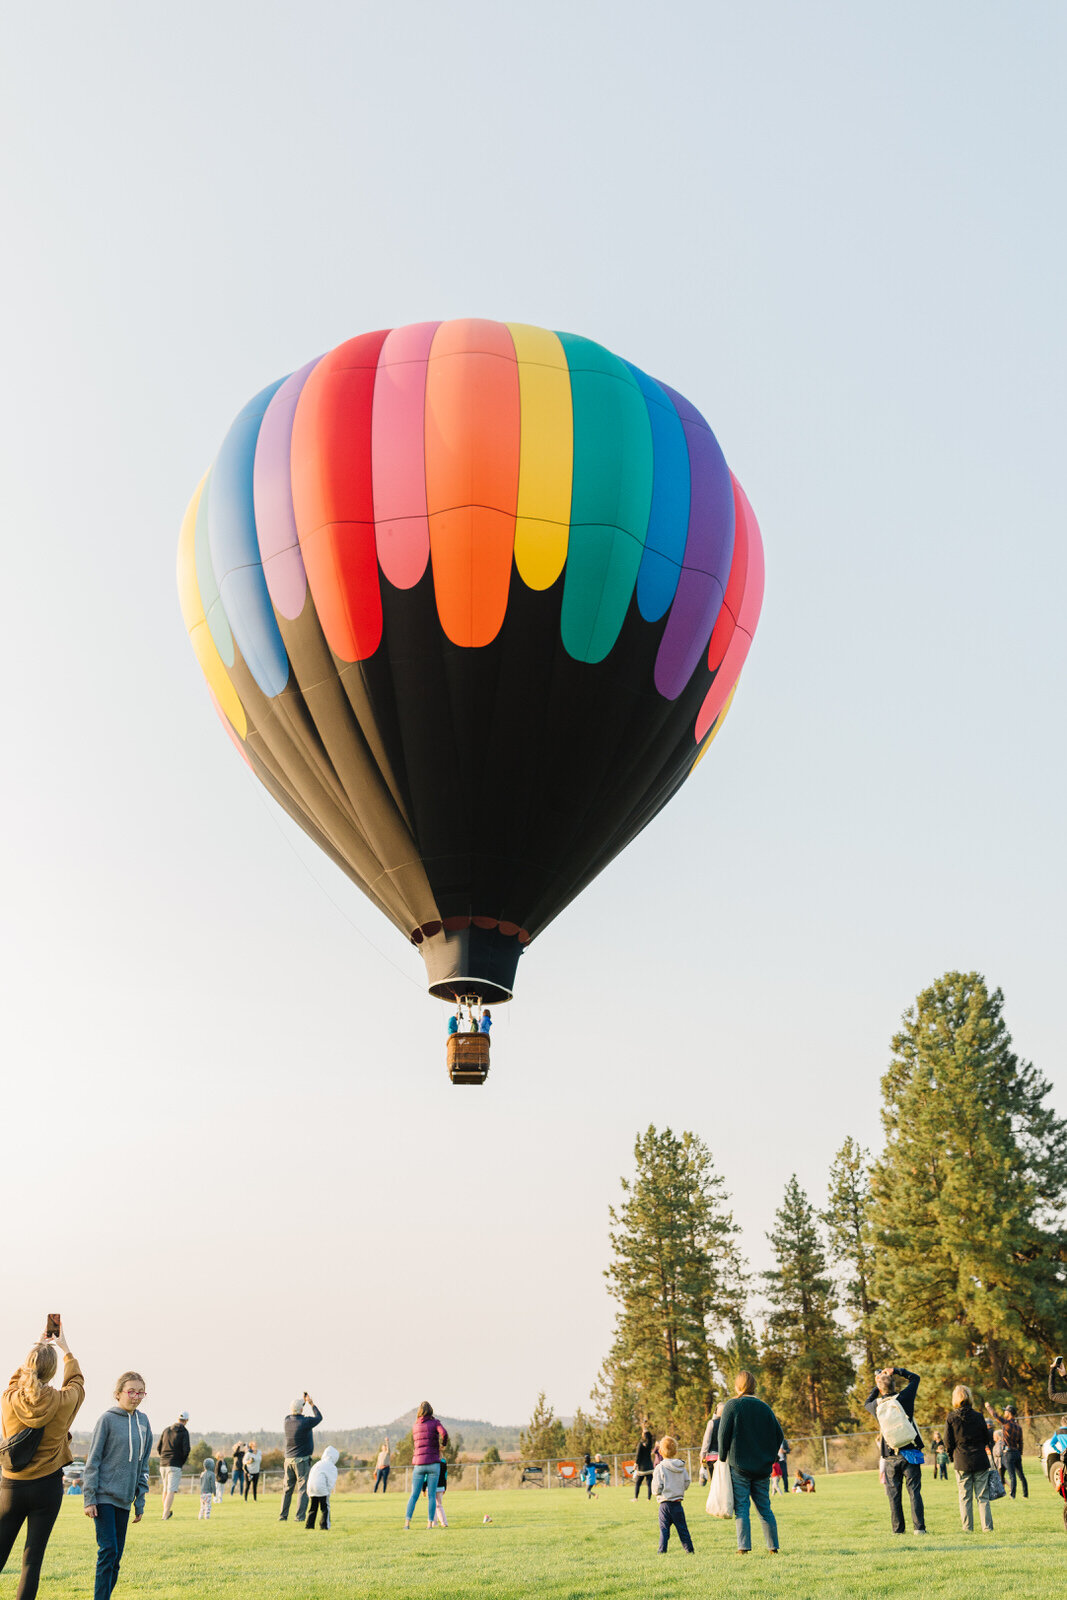 Balloons over Bend